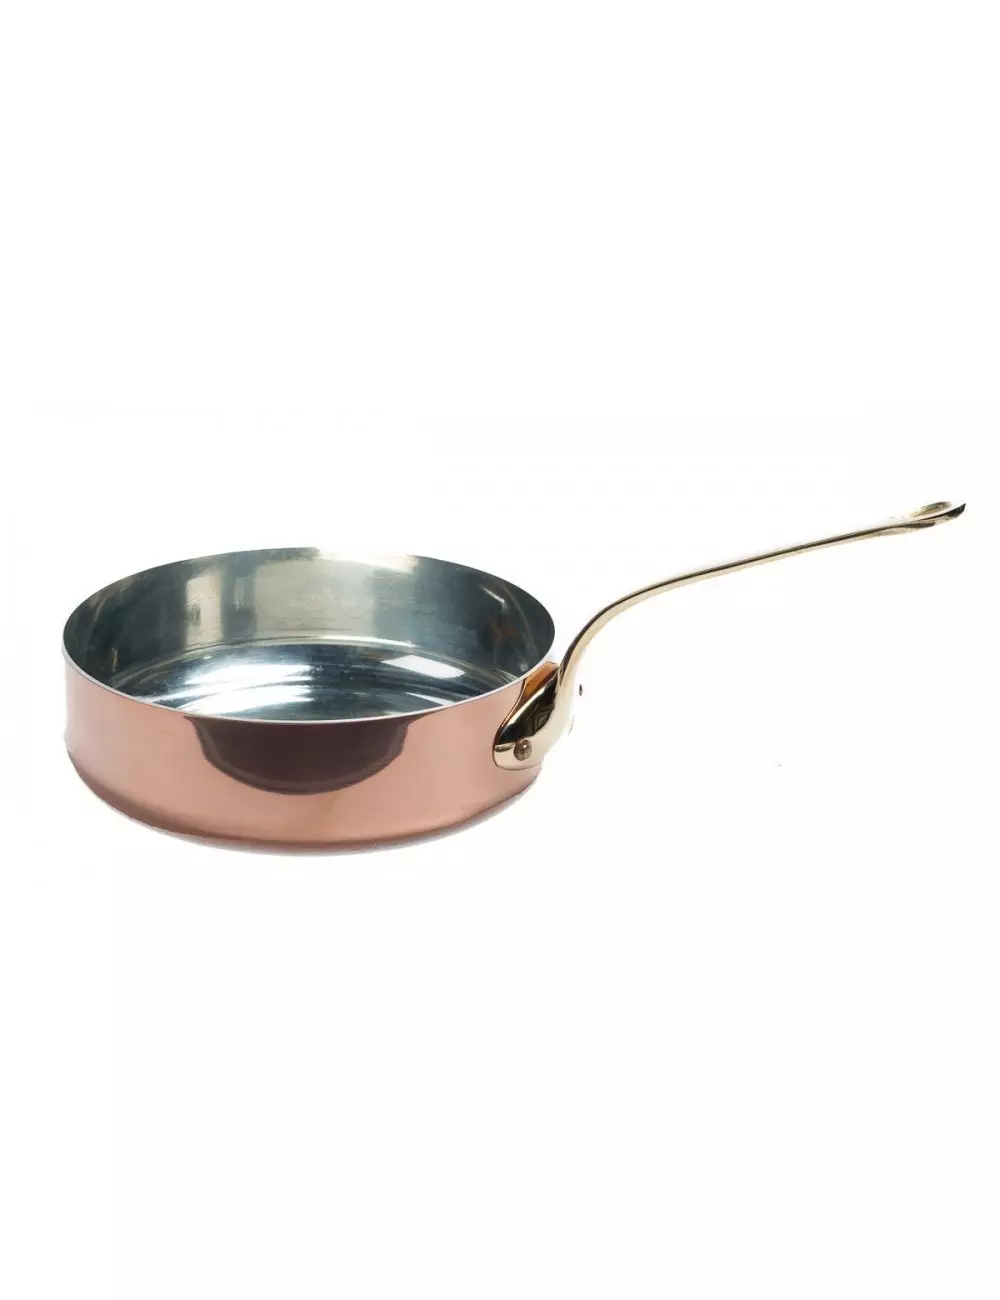 SPLAYED SAUTE PAN IN COPPER TIN EXTRA THICK WITH BRONZE HANDLE